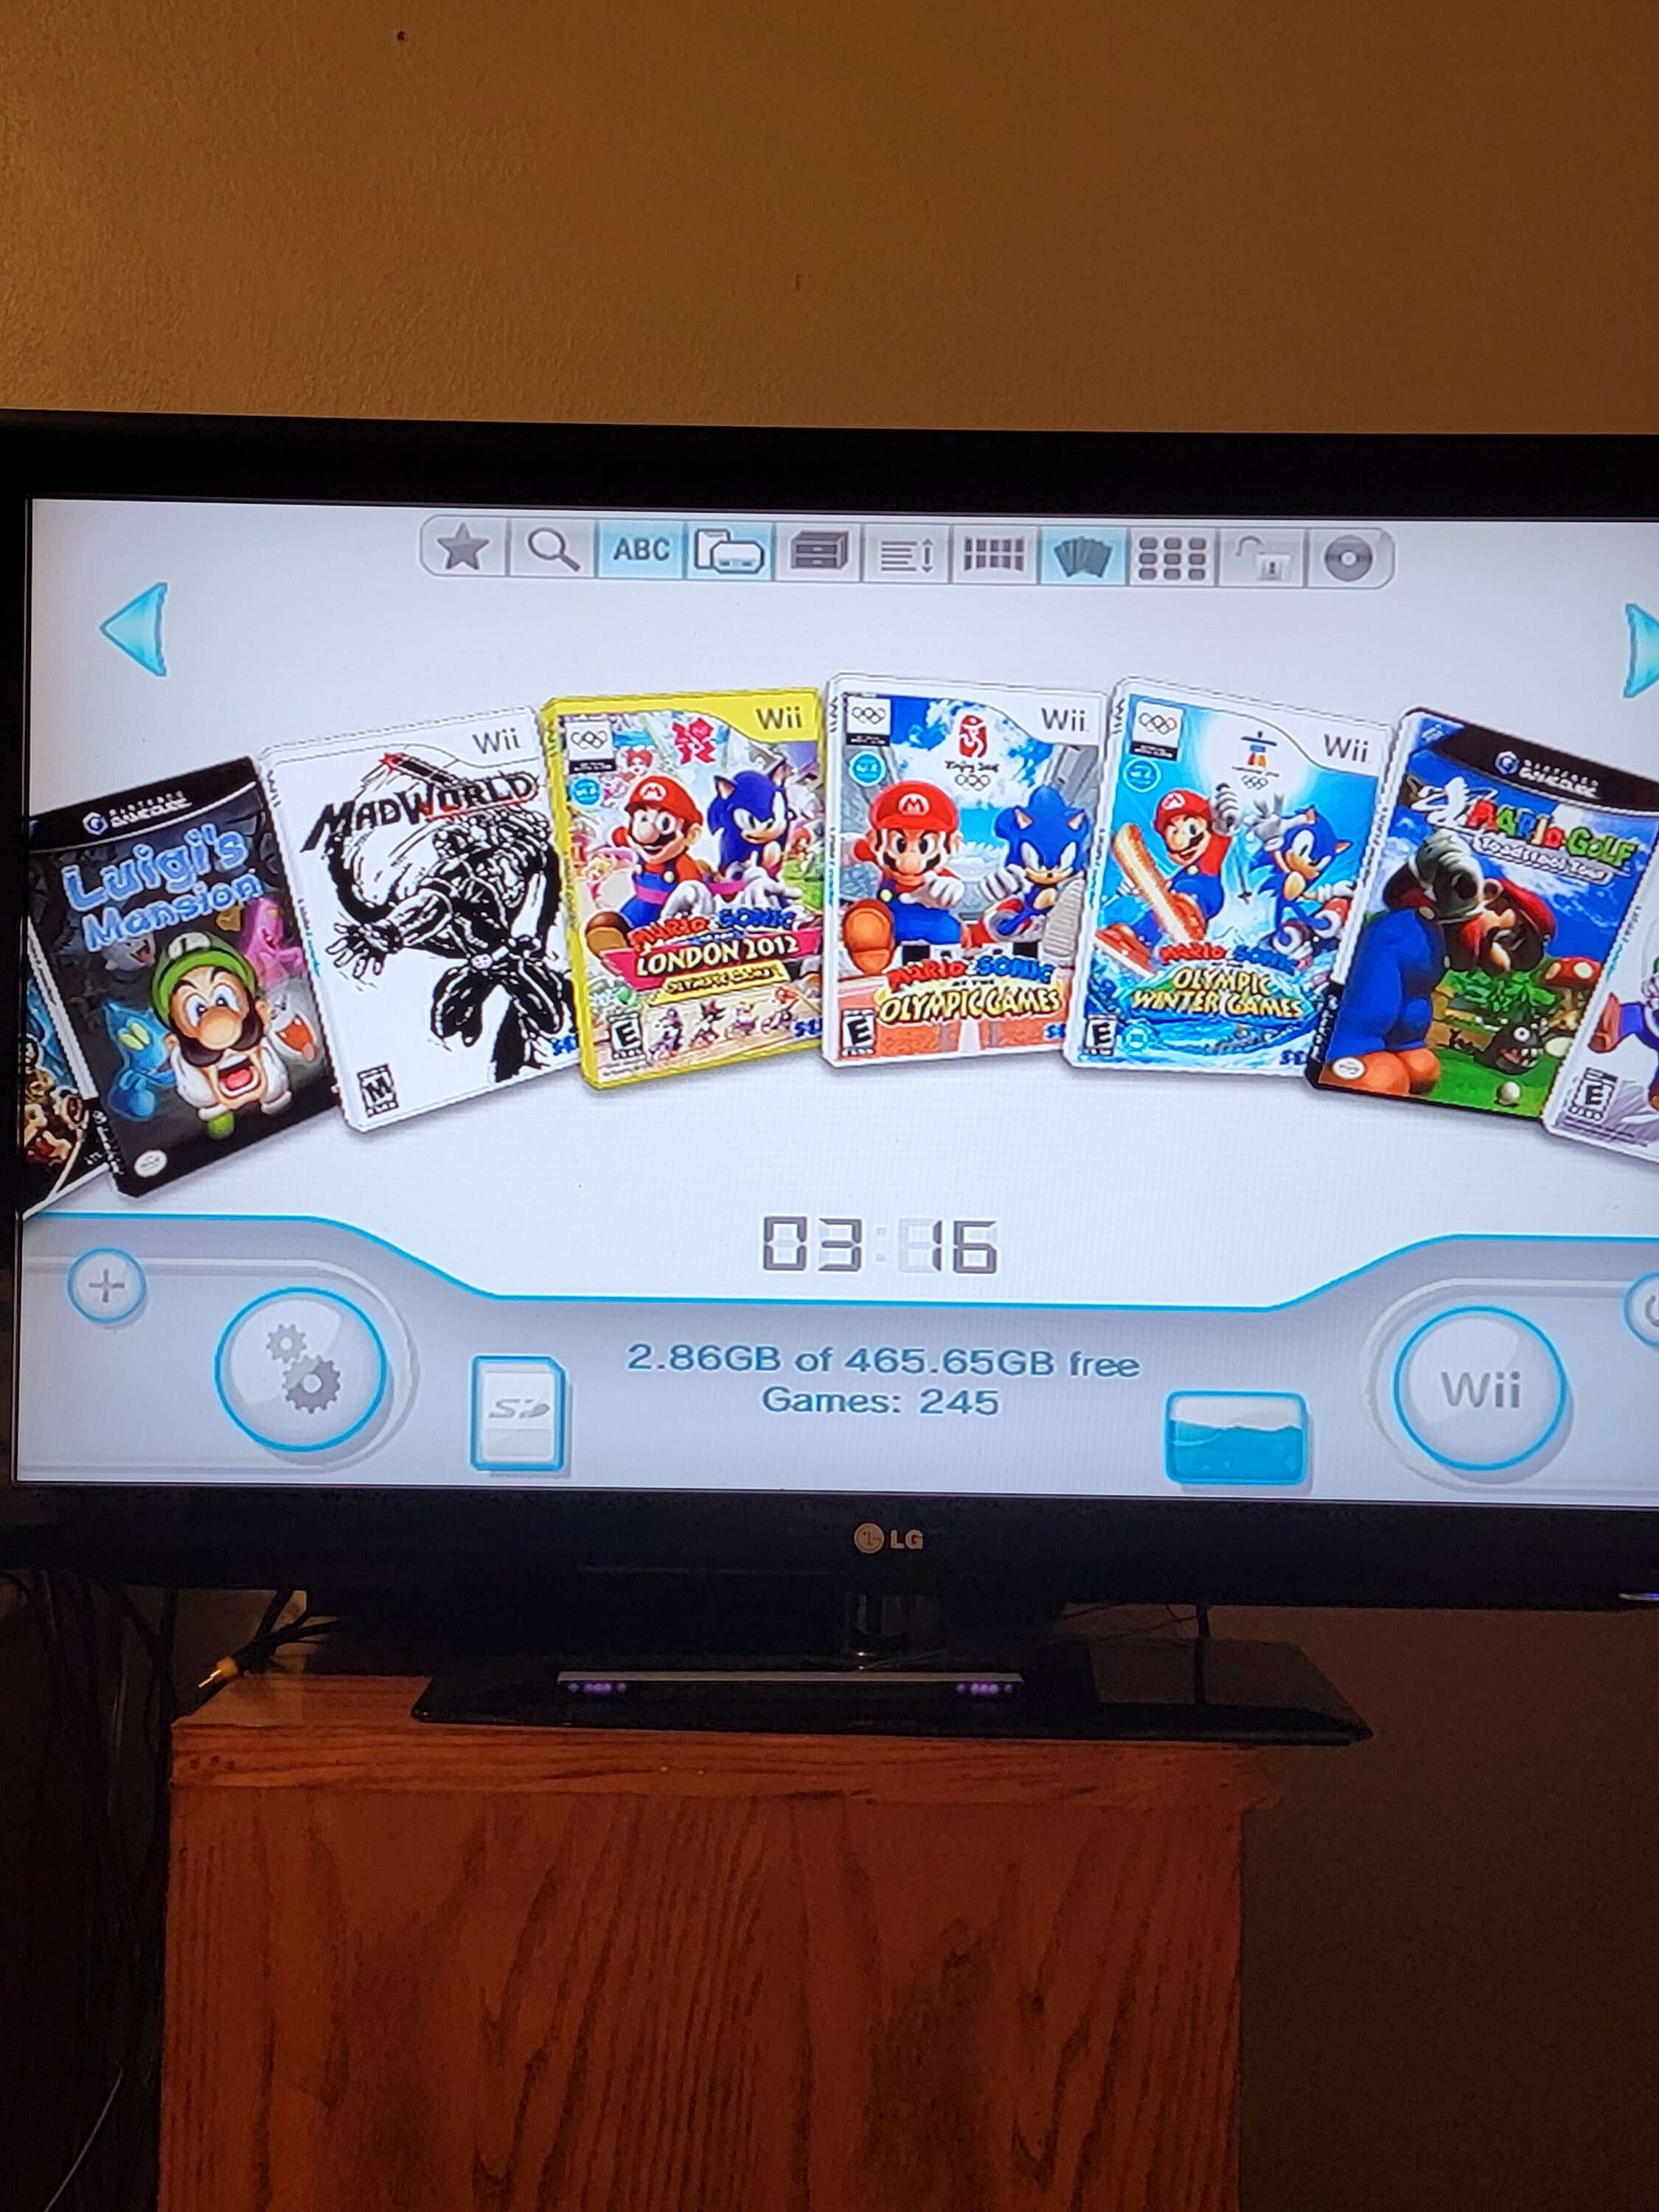 Google Drive Link with 300+ Gamecube Games, PSX, PS2, Wii U, 3DS